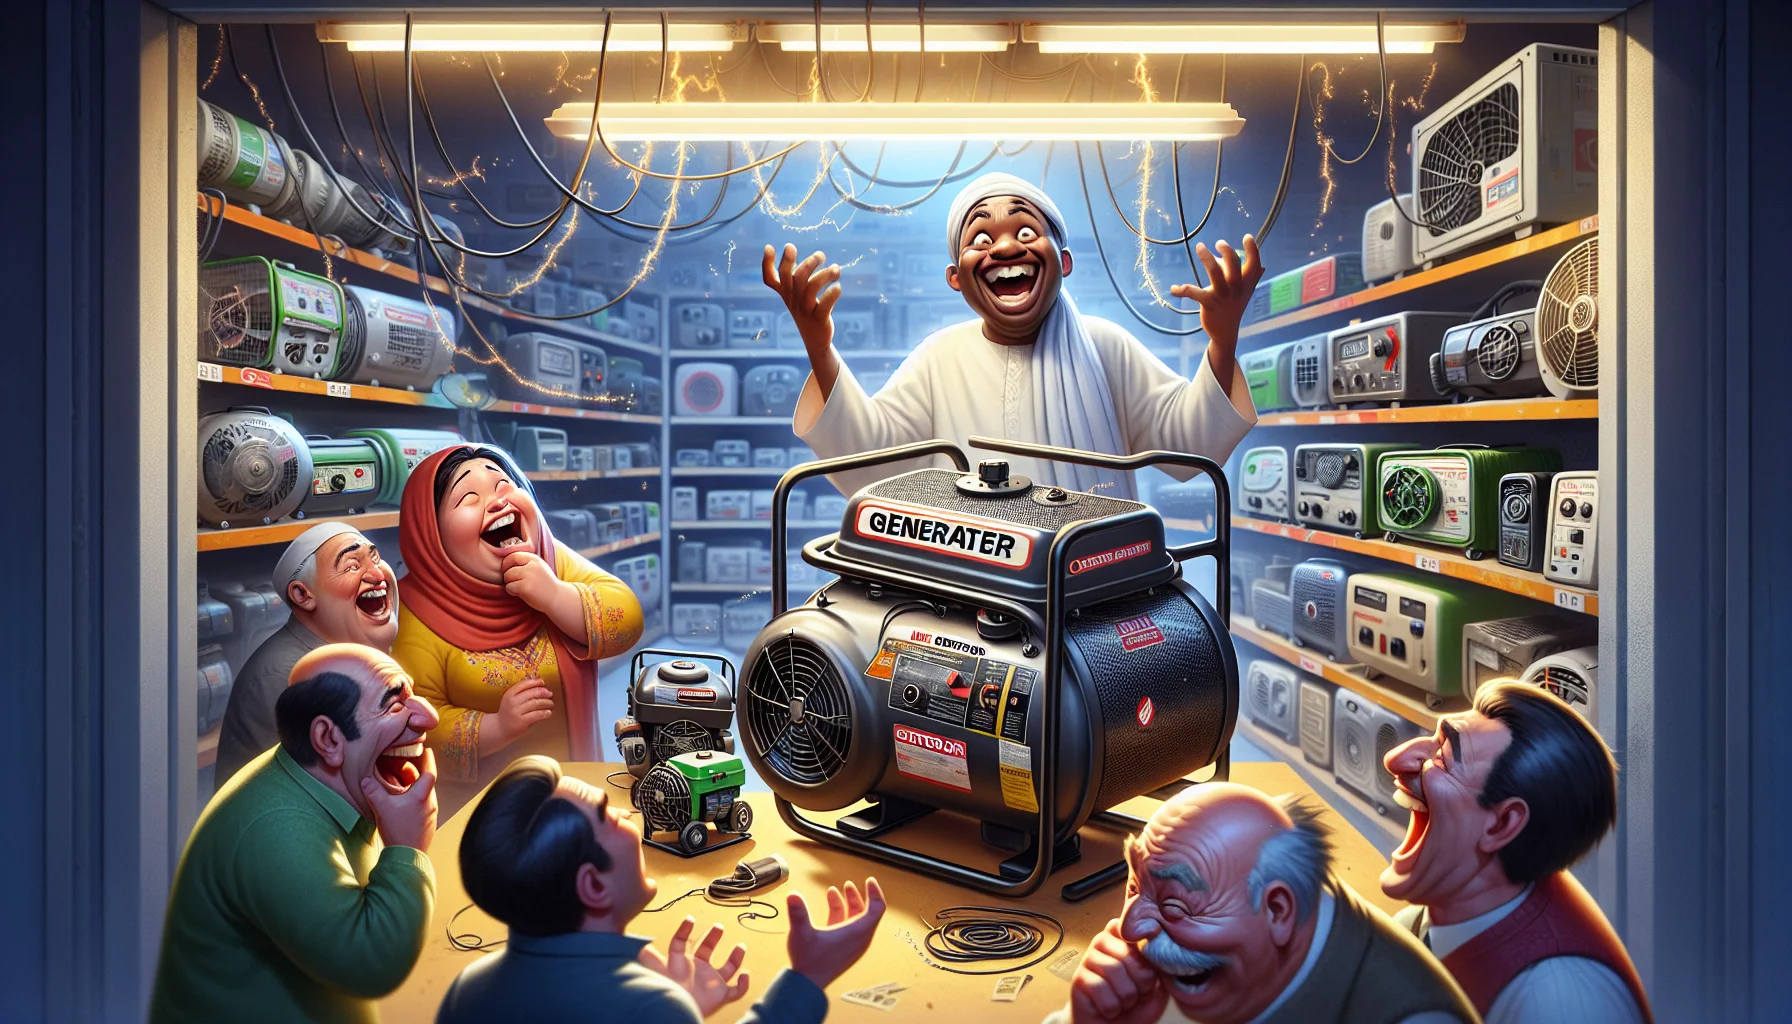 Create a humorous scene taking place in an electronics shop. A variety of indoor generators, with diverse designs and sizes, are displayed prominently. A confused Middle-Eastern store clerk is enthusiastically explaining the functionality of the generators to a group of customers: a South Asian woman laughing, a black man holding his stomach in fits of laughter, and a white elderly man chuckling behind his hand as he inspects a large, old-fashioned generator. Little sparks of electricity crackle from the generators, adding an element of fantastical farce to the scene.